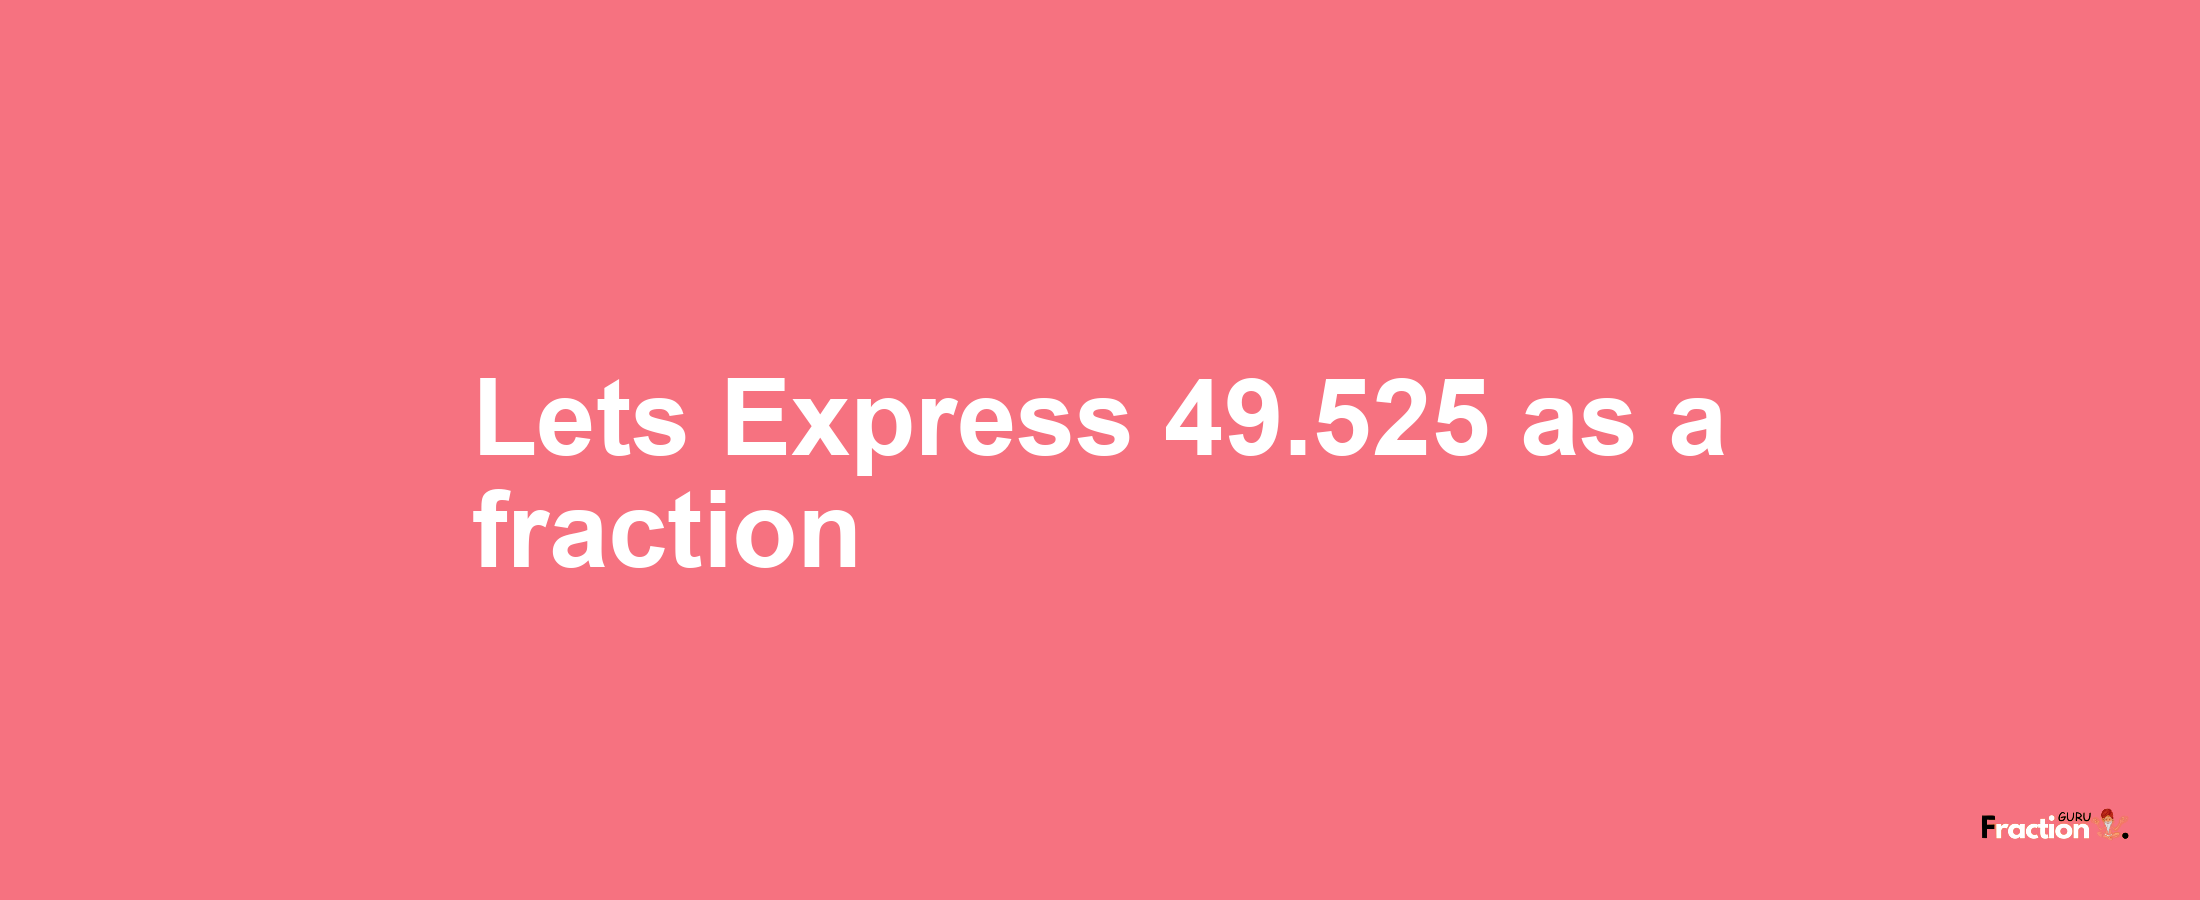 Lets Express 49.525 as afraction